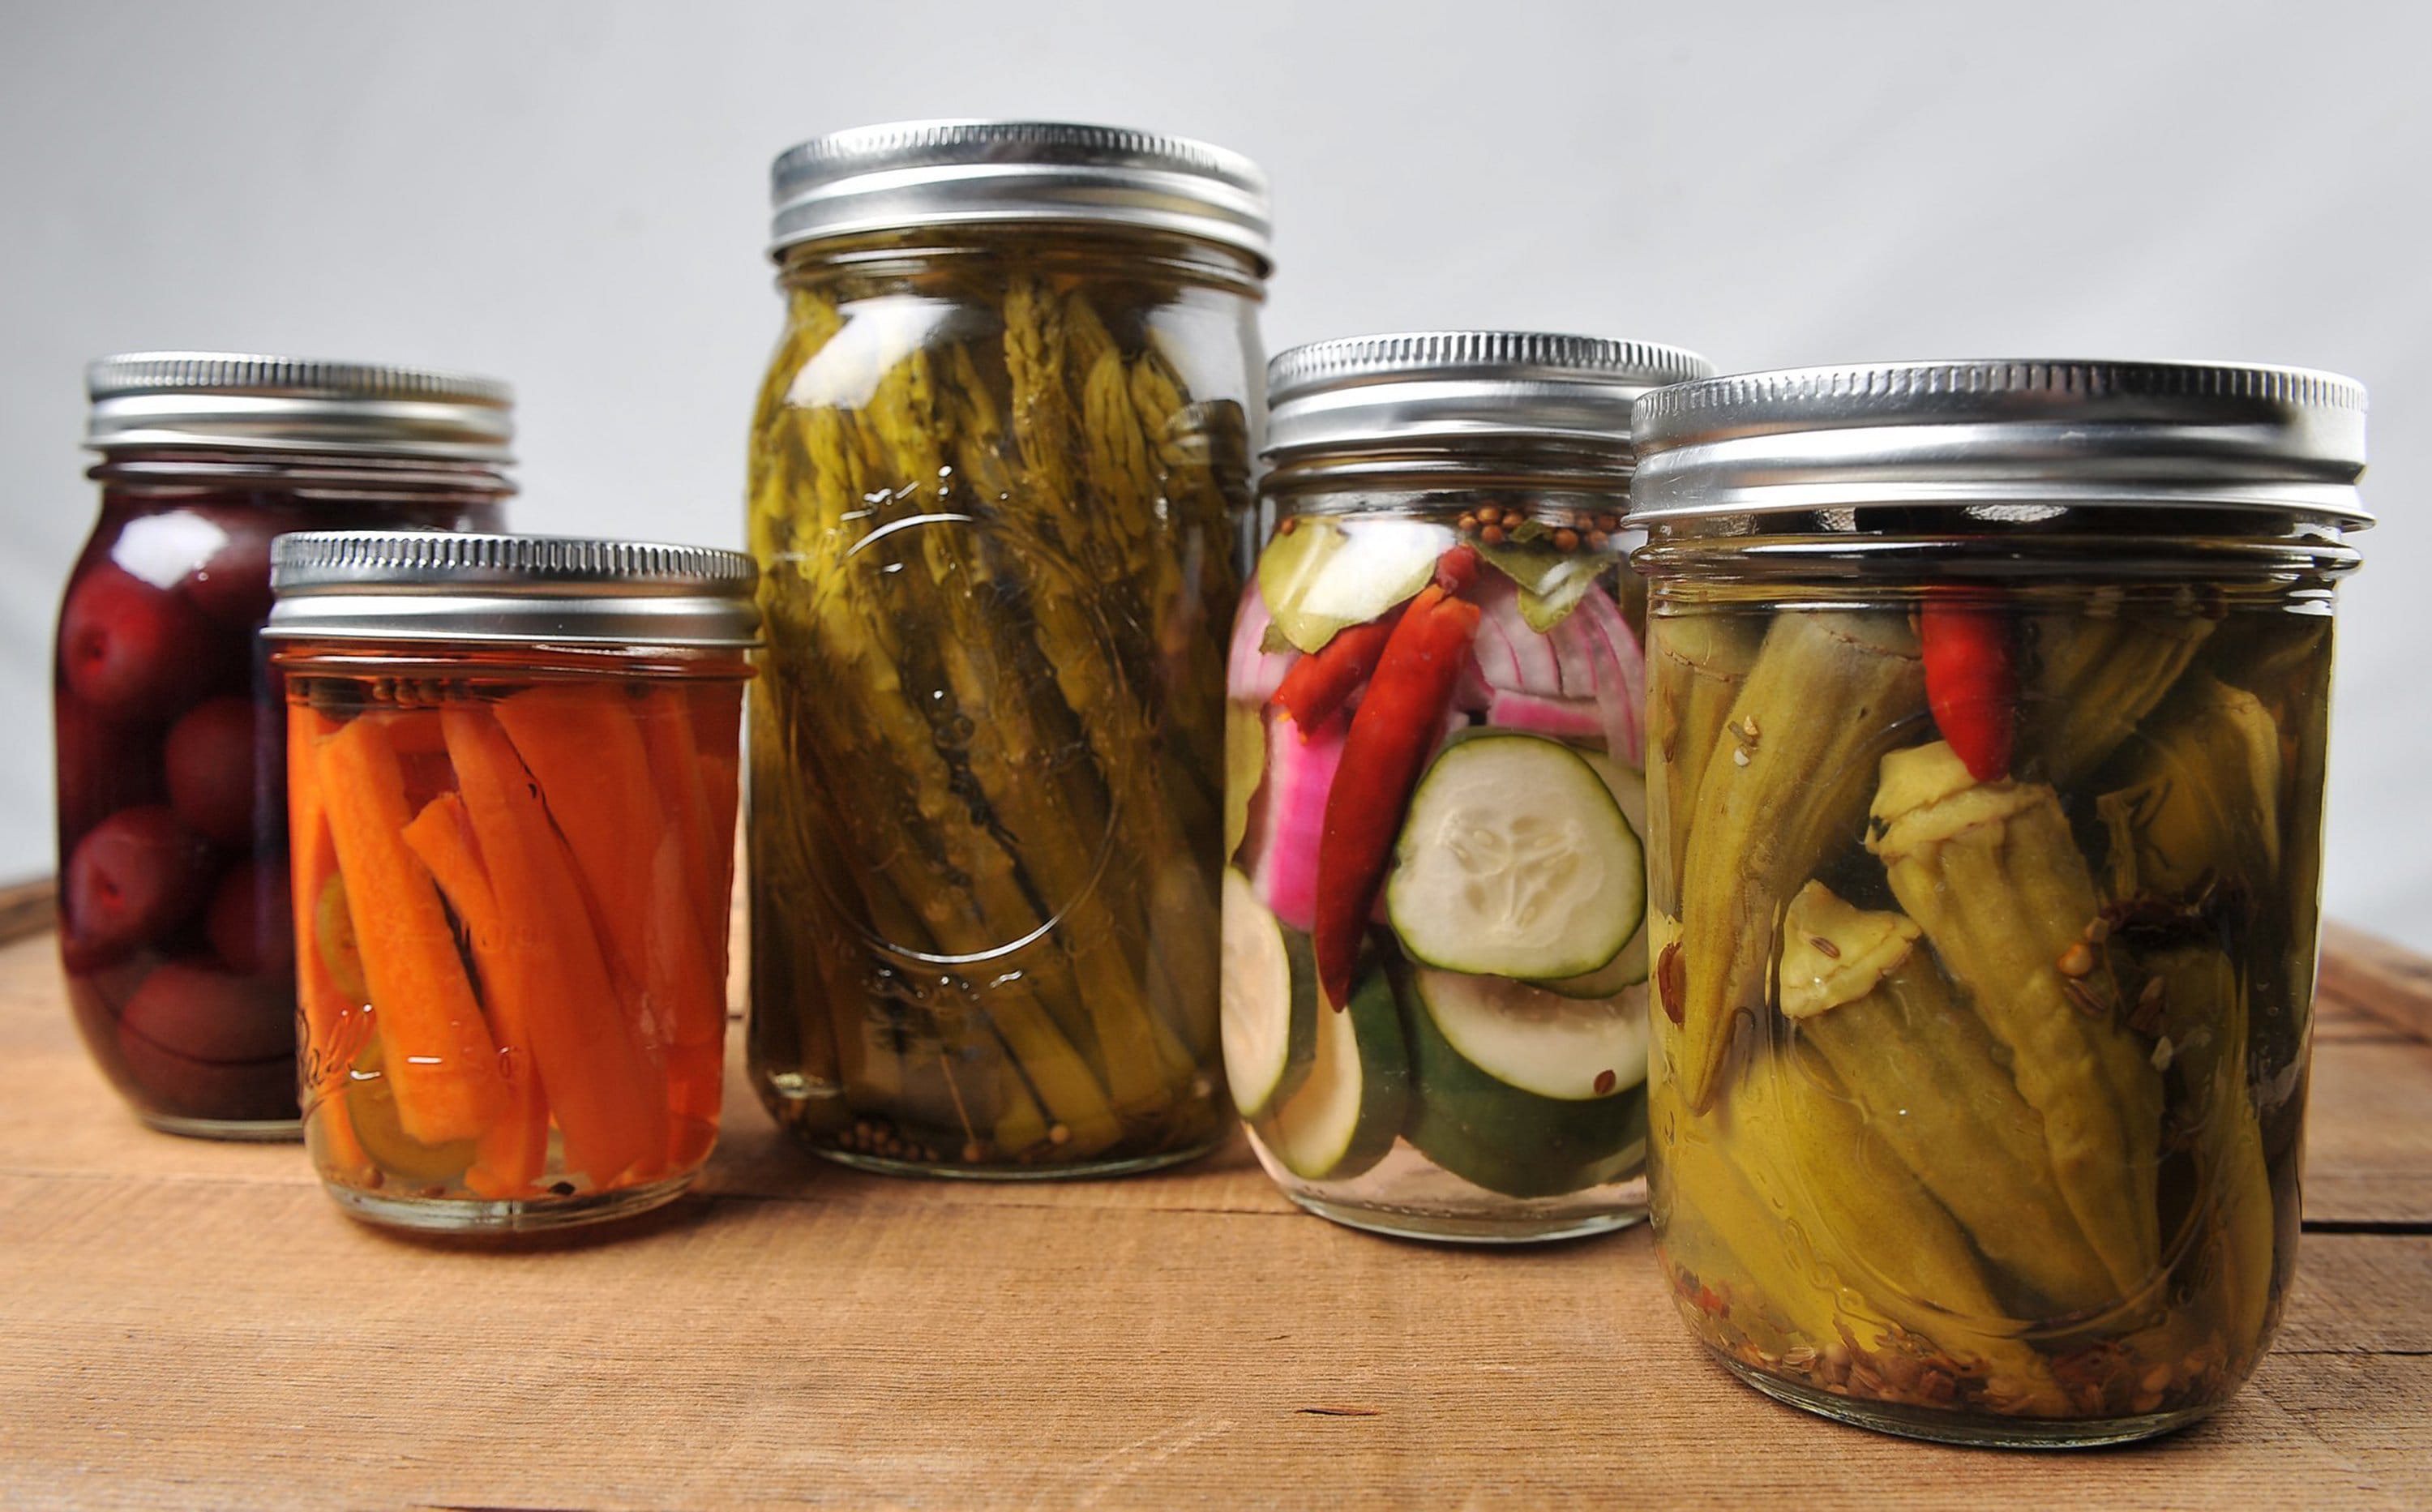 Jars of colorful pickled produce, including, from left, pickled cherries (Kristy Page), carrots (Kristy Page), asparagus (Felix Muzquiz), cucumbers (Kristy Page) and okra (Felix Muzquiz).